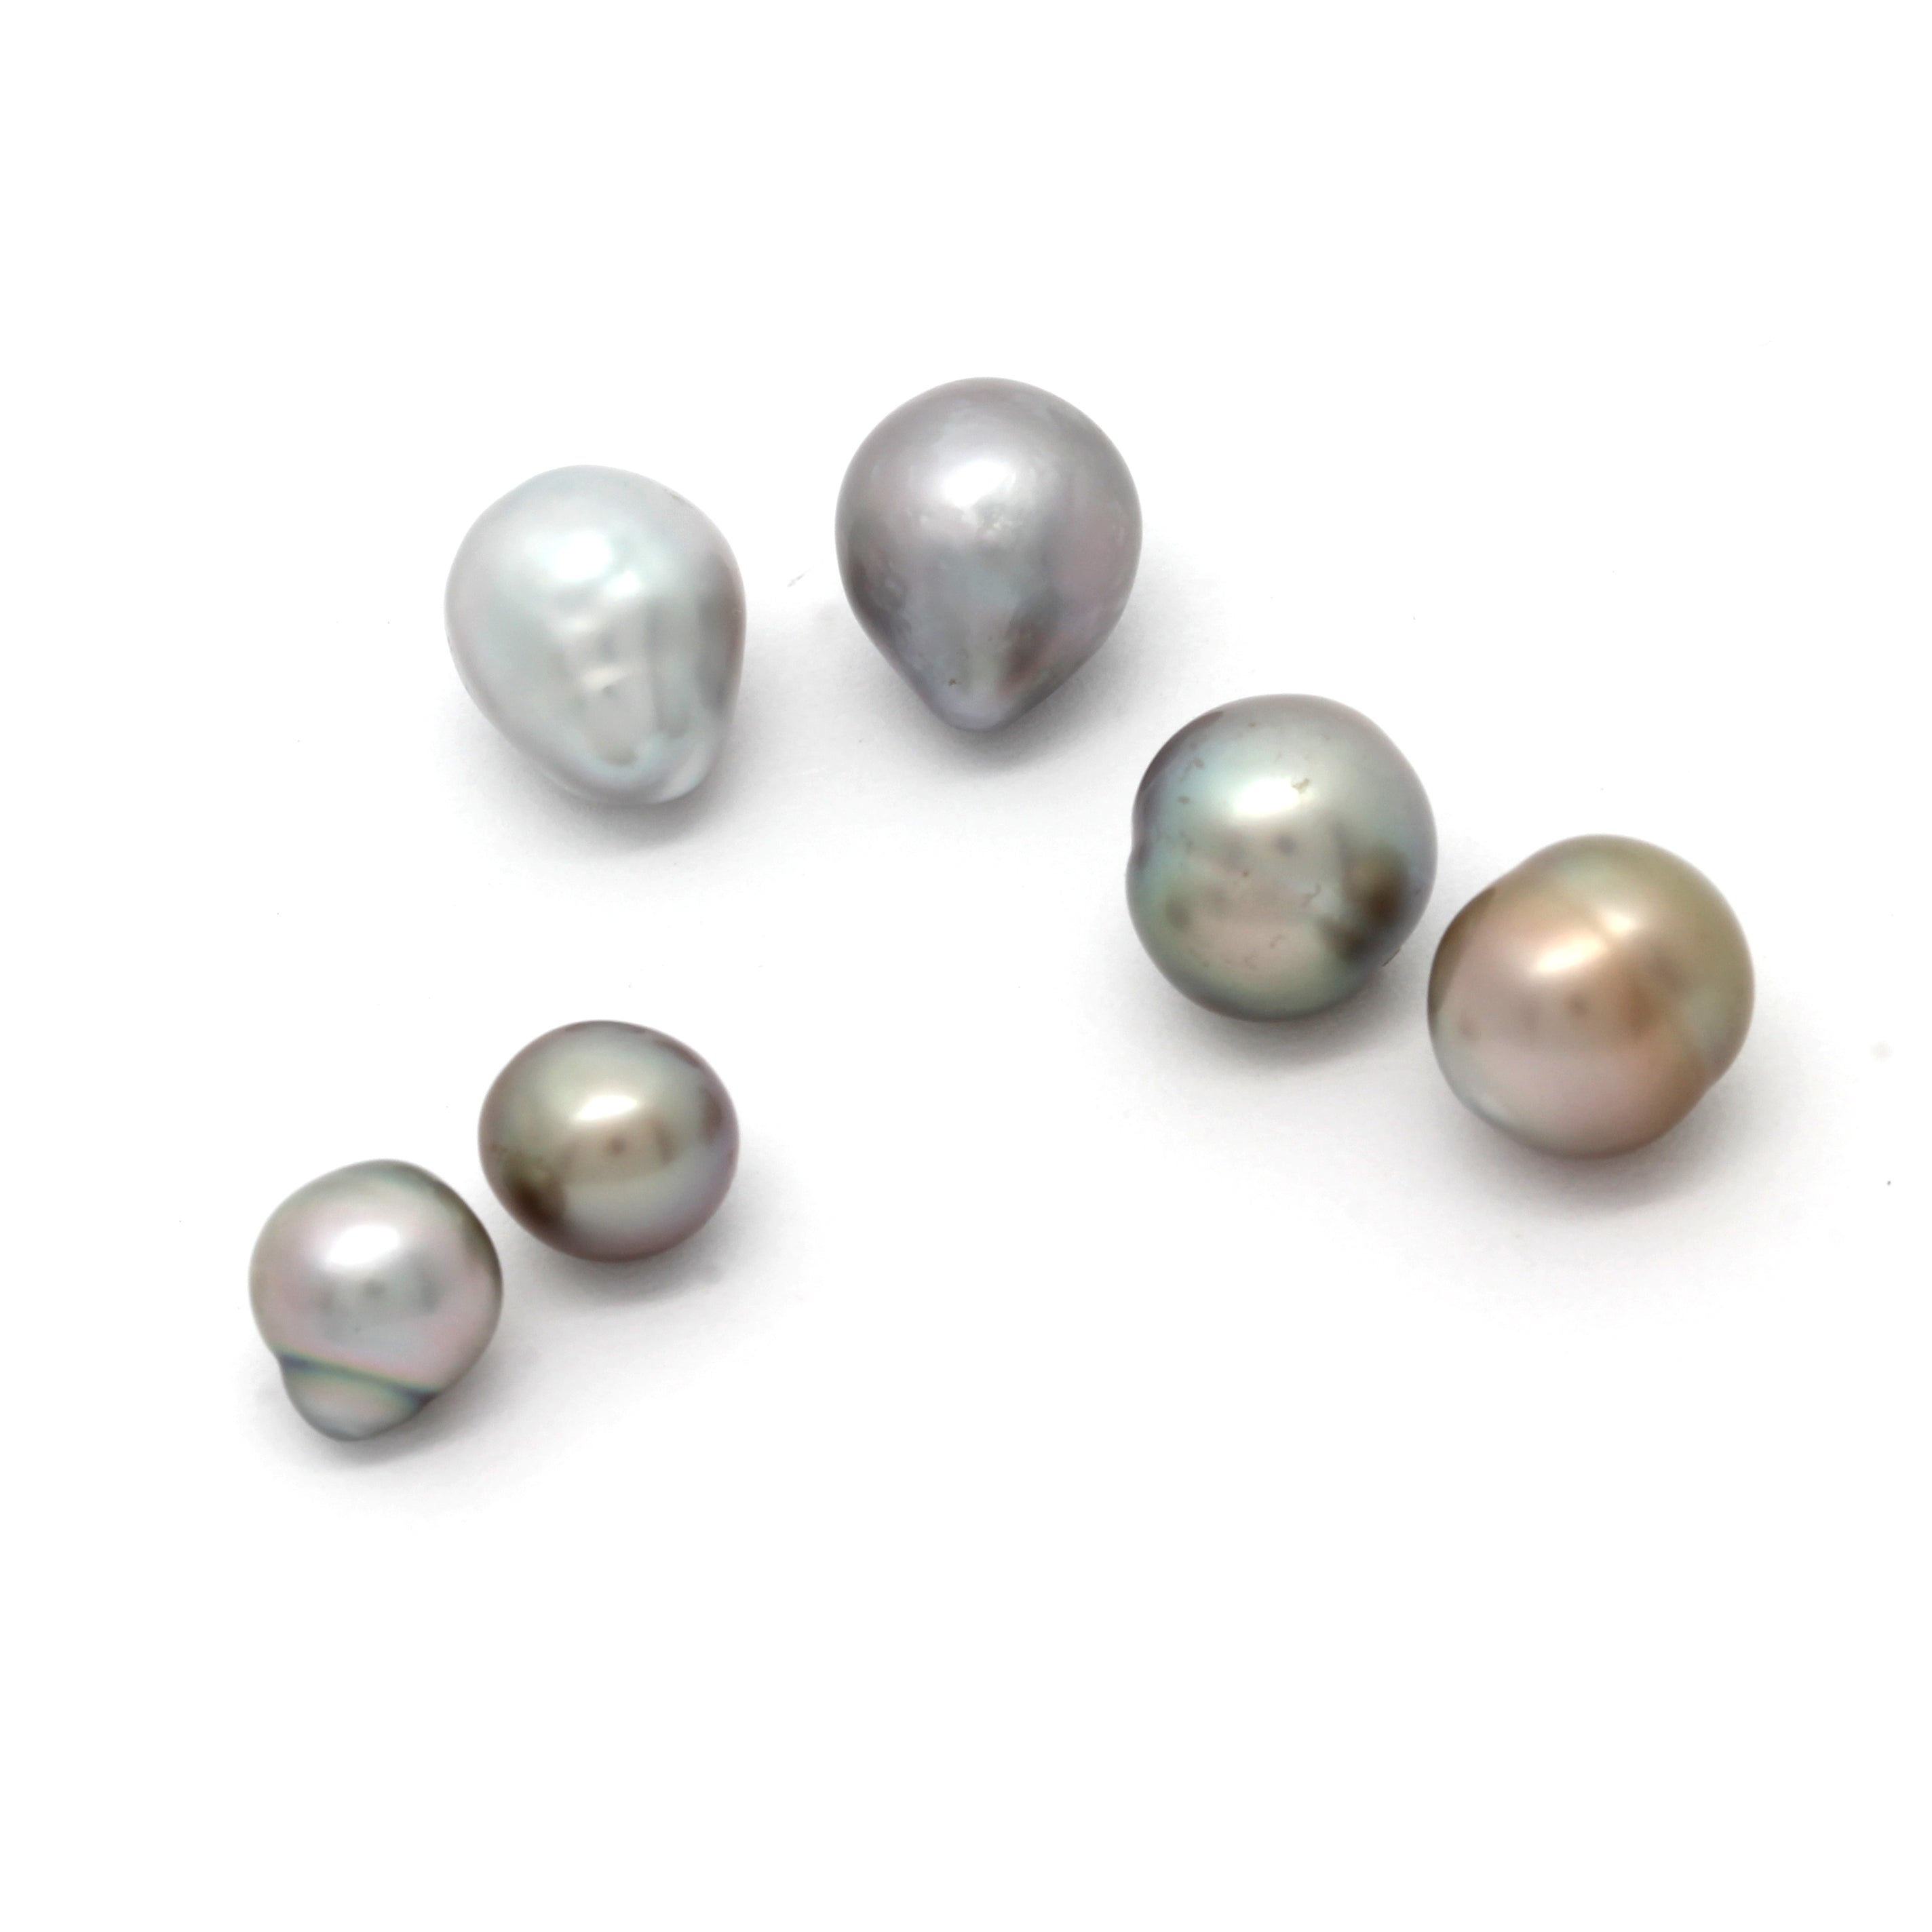 Lot of 6 Baroque Cortez Pearls from 2020 HARVEST